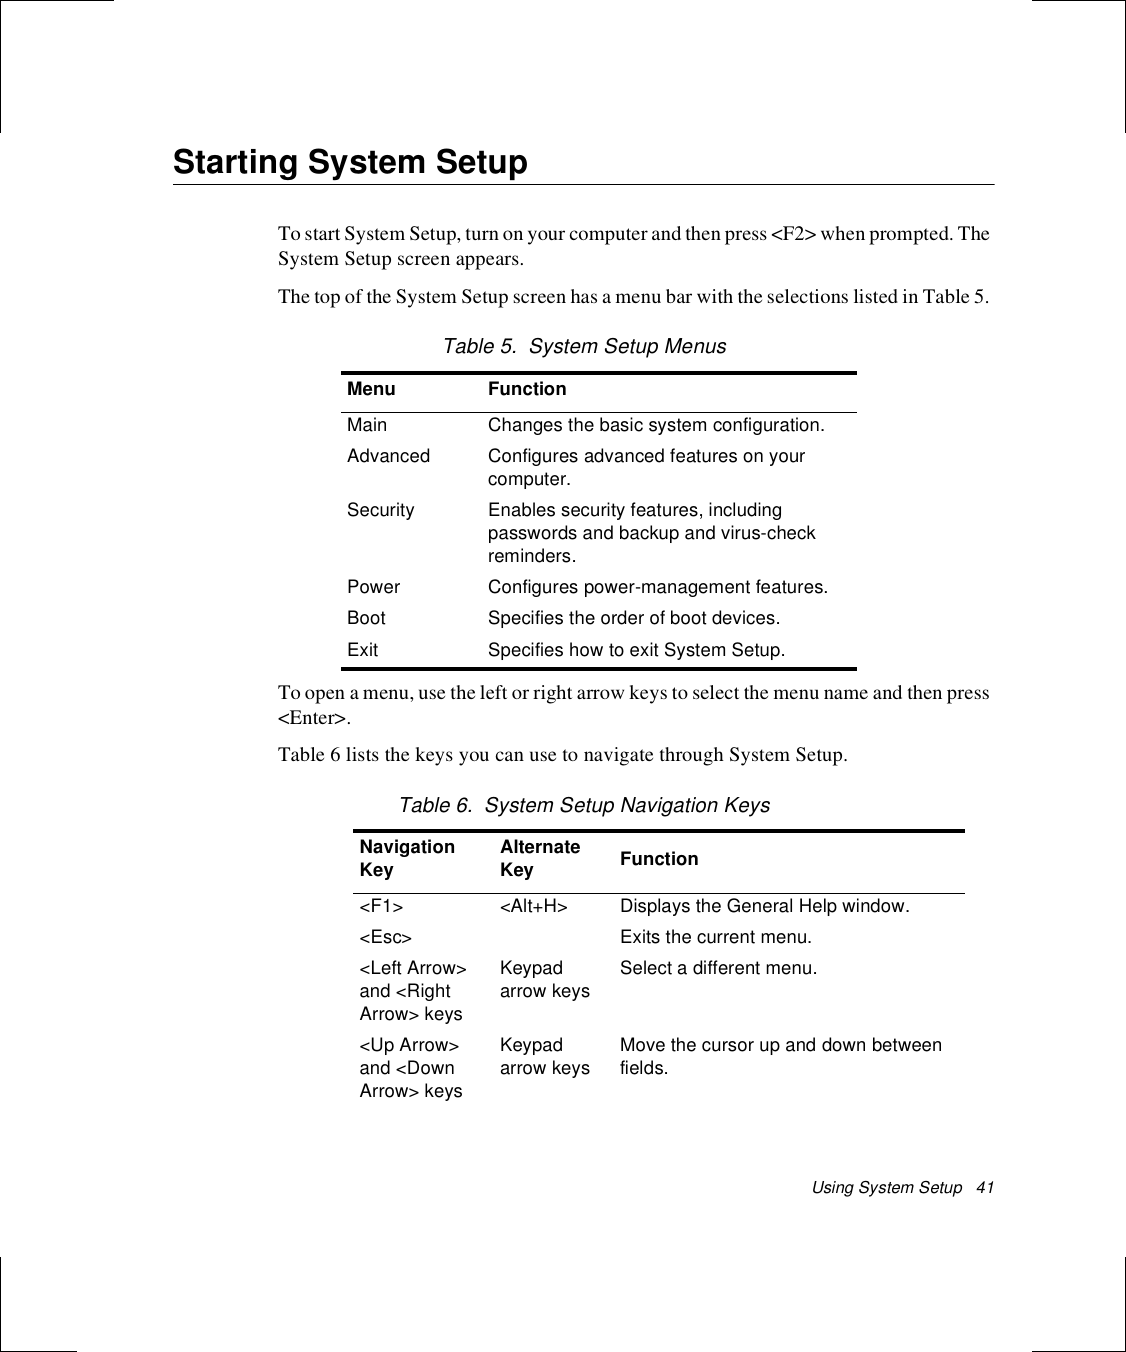 Using System Setup   41Starting System SetupTo start System Setup, turn on your computer and then press &lt;F2&gt; when prompted. The System Setup screen appears. The top of the System Setup screen has a menu bar with the selections listed in Table 5. Table 5.  System Setup MenusTo open a menu, use the left or right arrow keys to select the menu name and then press &lt;Enter&gt;. Table 6 lists the keys you can use to navigate through System Setup. Table 6.  System Setup Navigation KeysMenu FunctionMain Changes the basic system configuration.Advanced Configures advanced features on your computer.Security Enables security features, including passwords and backup and virus-check reminders.Power Configures power-management features.Boot Specifies the order of boot devices.Exit Specifies how to exit System Setup.Navigation Key Alternate Key Function&lt;F1&gt; &lt;Alt+H&gt; Displays the General Help window.&lt;Esc&gt; Exits the current menu.&lt;Left Arrow&gt; and &lt;Right Arrow&gt; keys Keypad arrow keysSelect a different menu.&lt;Up Arrow&gt; and &lt;Down Arrow&gt; keysKeypad arrow keysMove the cursor up and down between fields.